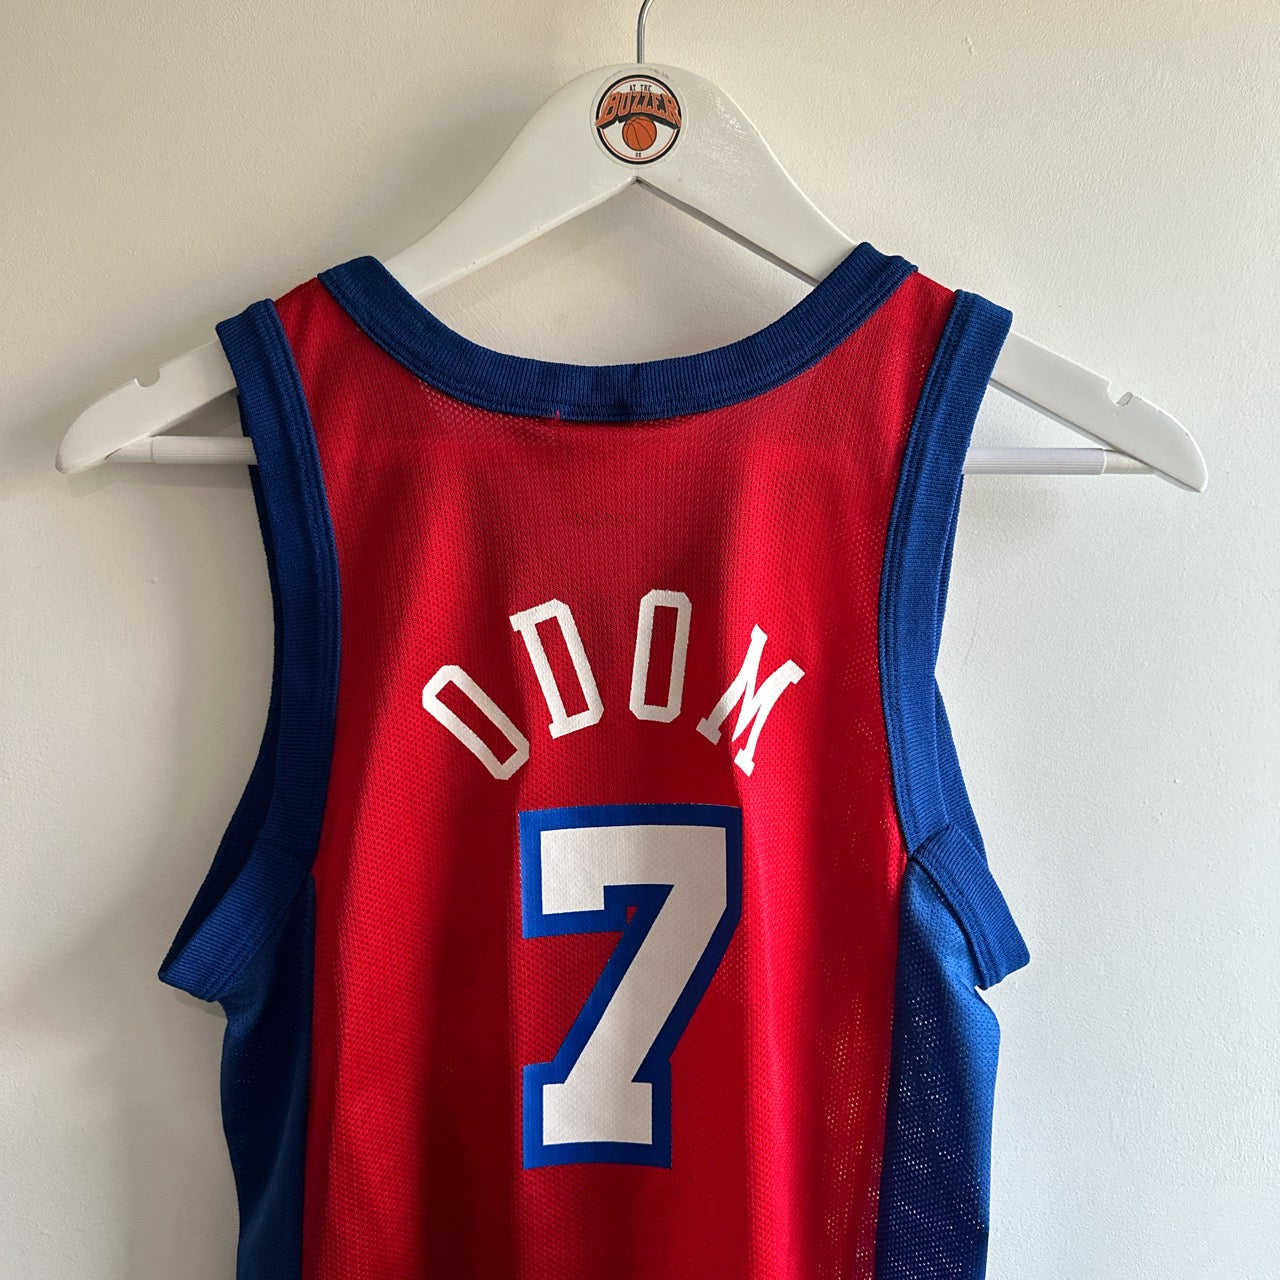 Los Angeles Clippers Lamar Odom jersey - Champion (Youth Medium)